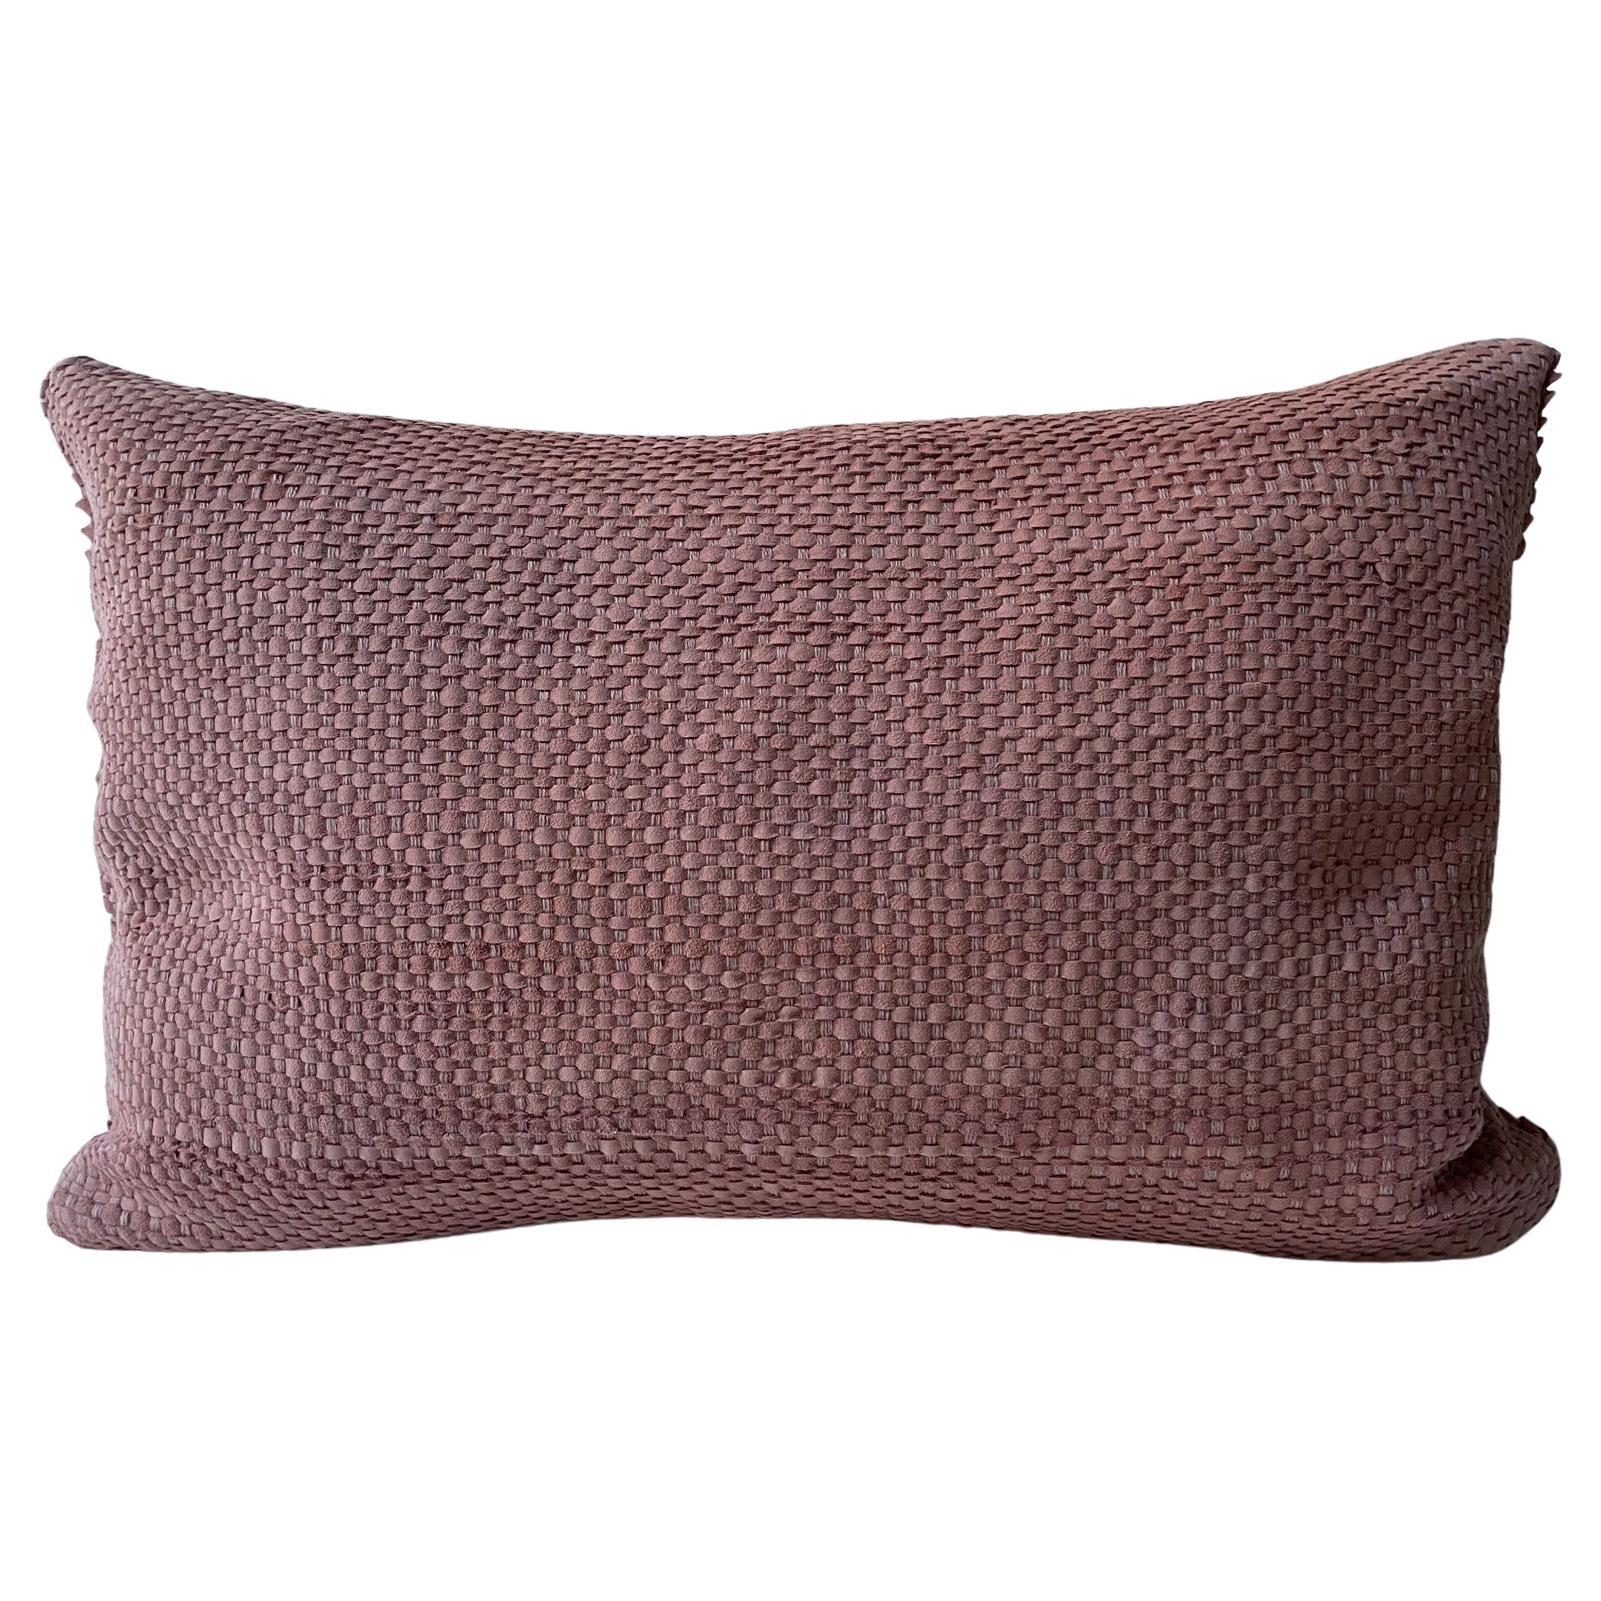 Hand Woven Suede Cushion Colour Old Rose Oblong Shape For Sale